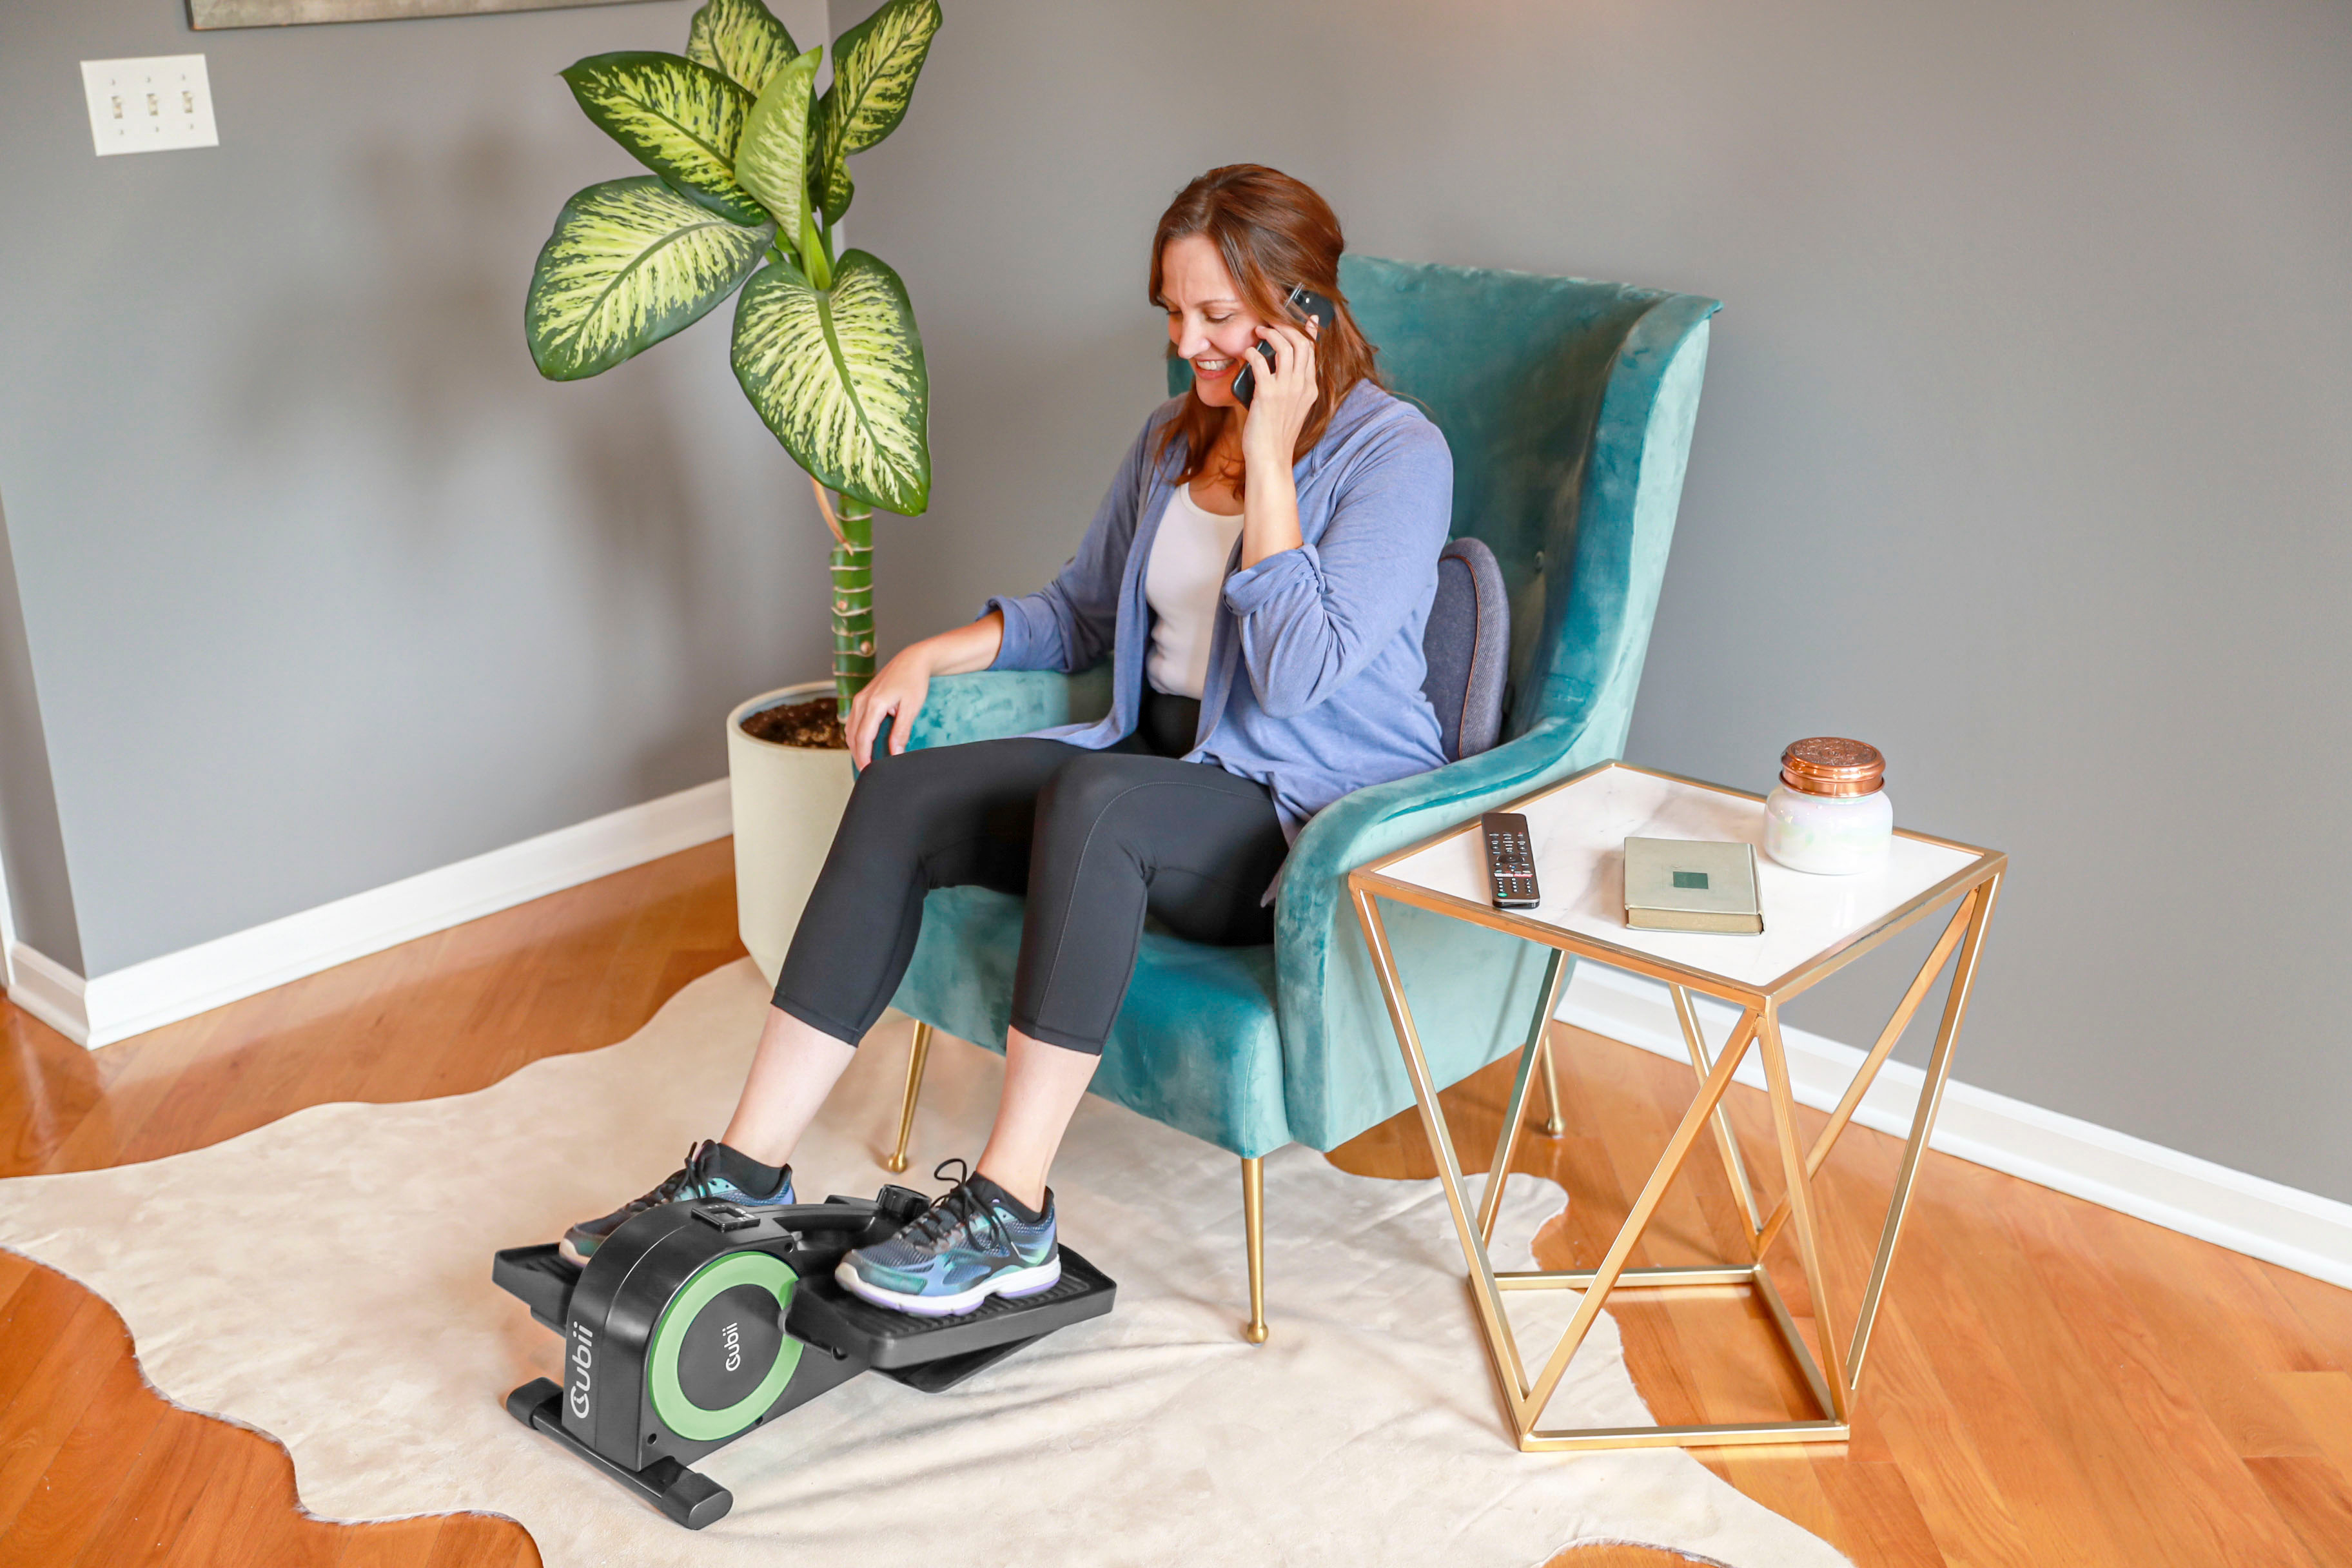 Best Buy: Cubii JR2+ Seated Elliptical with Bluetooth Connectivity